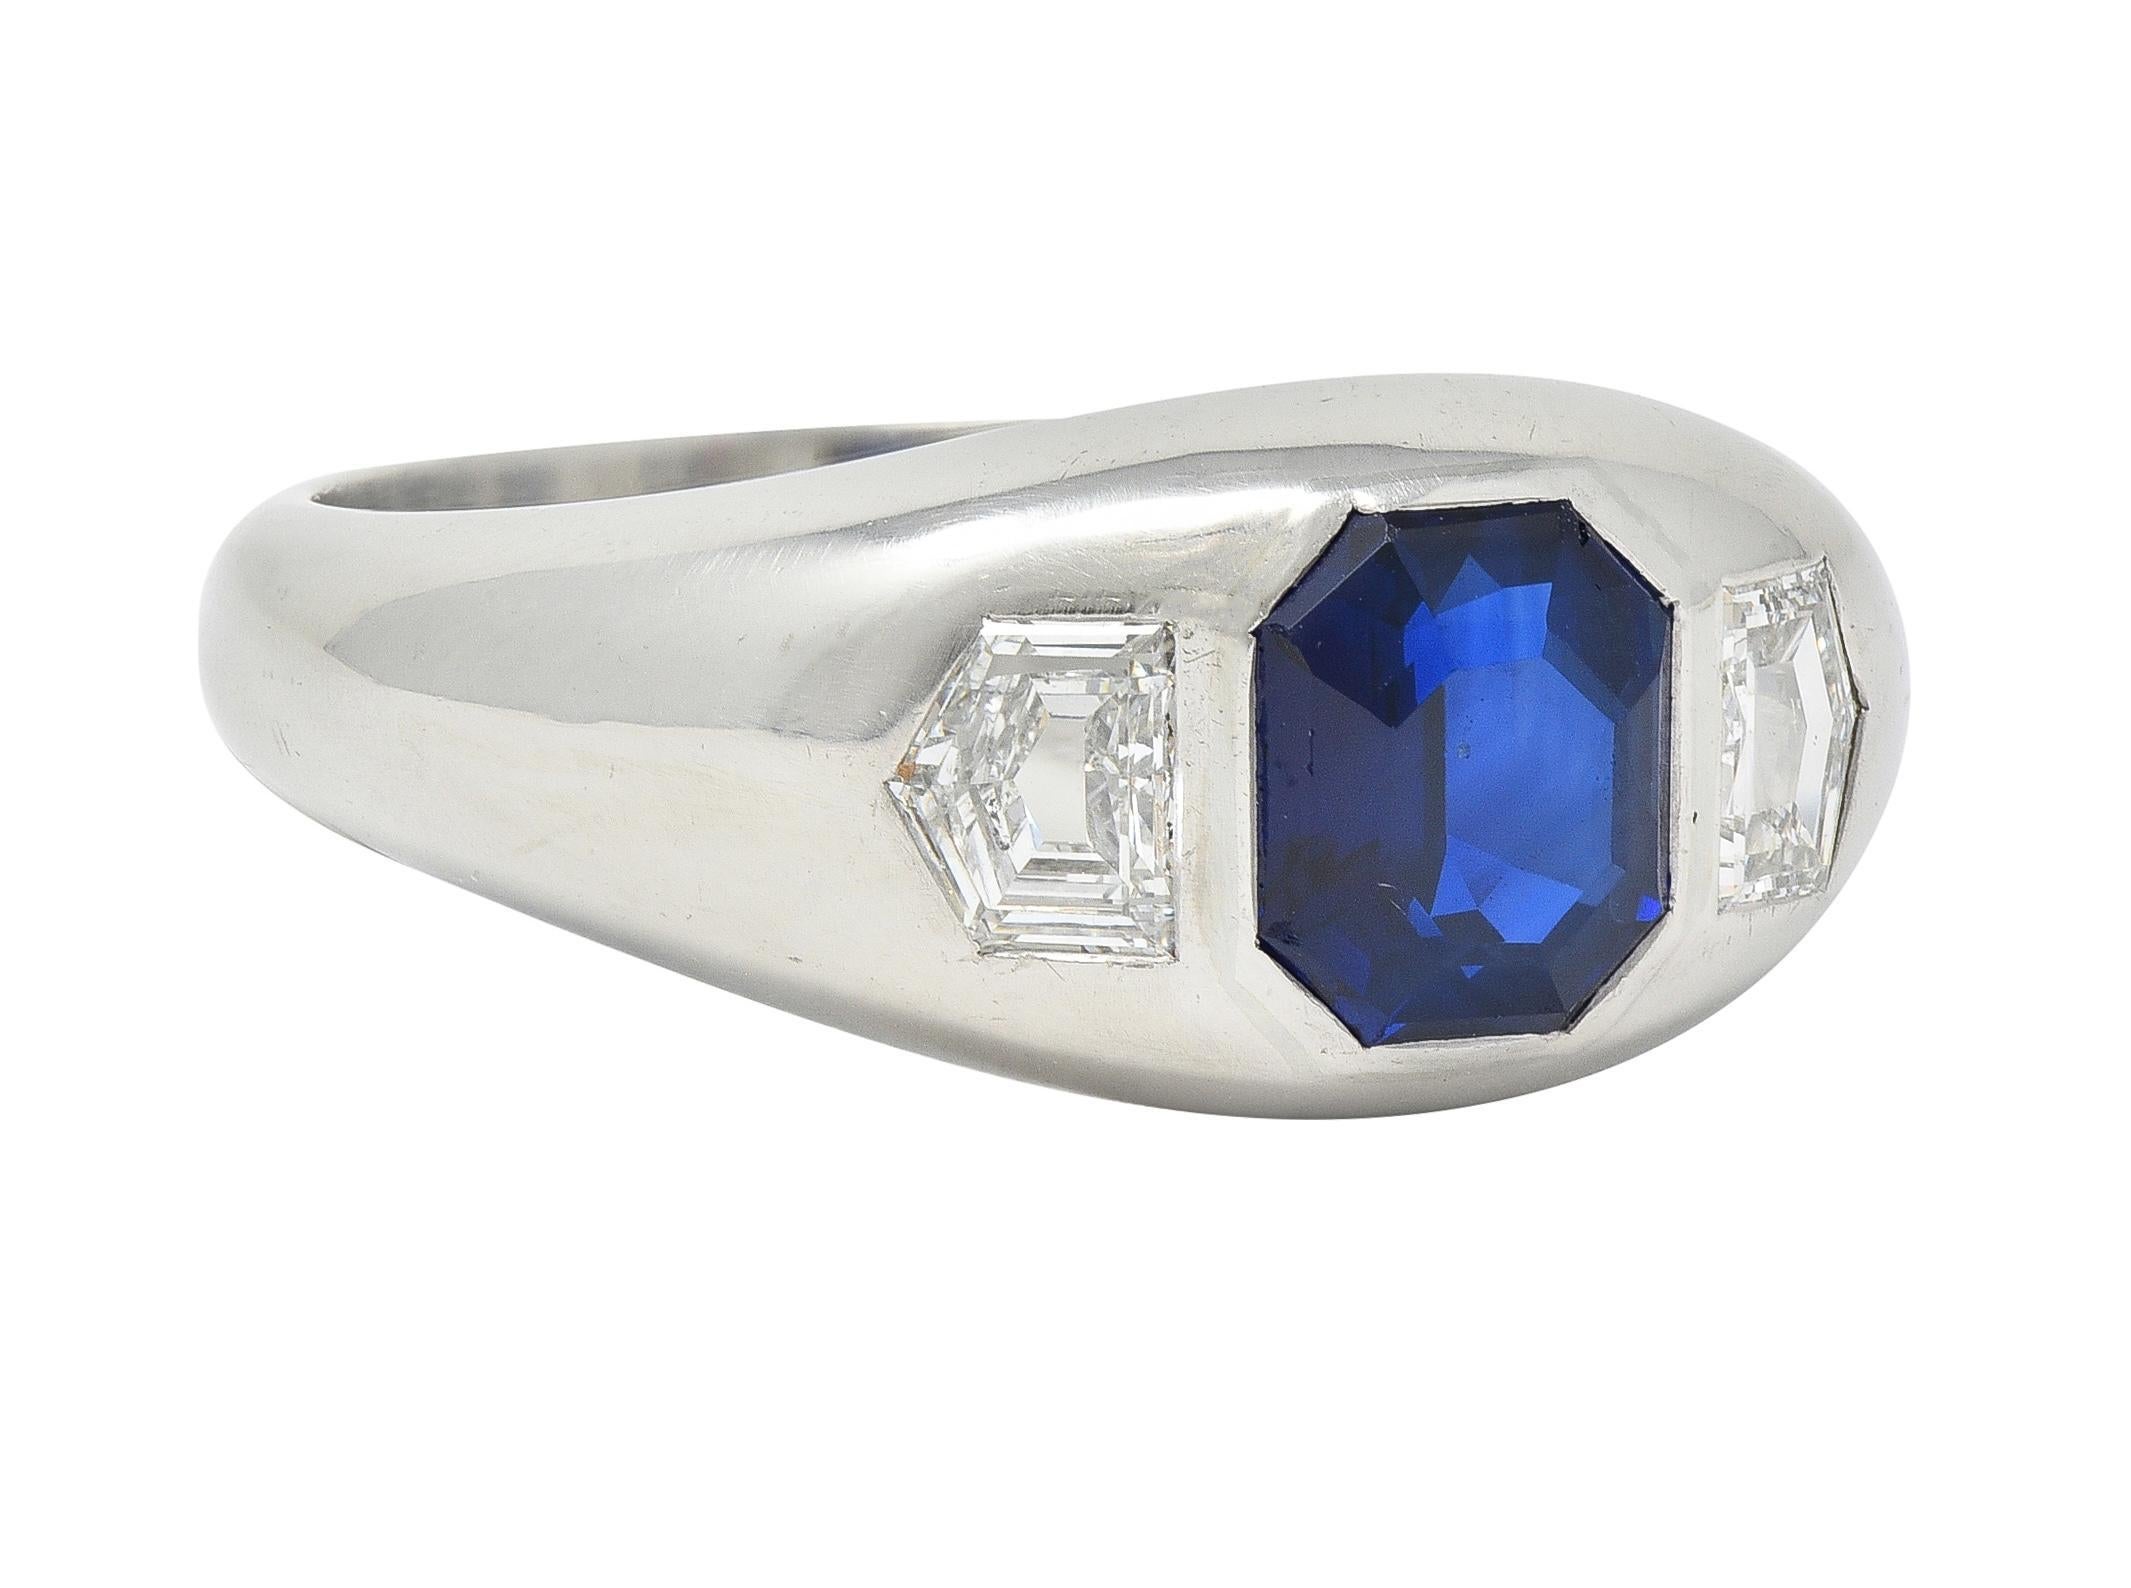 Centering an octagonal step-cut sapphire weighing 2.33 carats - transparent dark blue 
Natural Cambodian in origin with no indications of heat treatment
Flush set and flanked by pentagonal step-cut diamonds 
Weighing approximately 0.74 carat total -